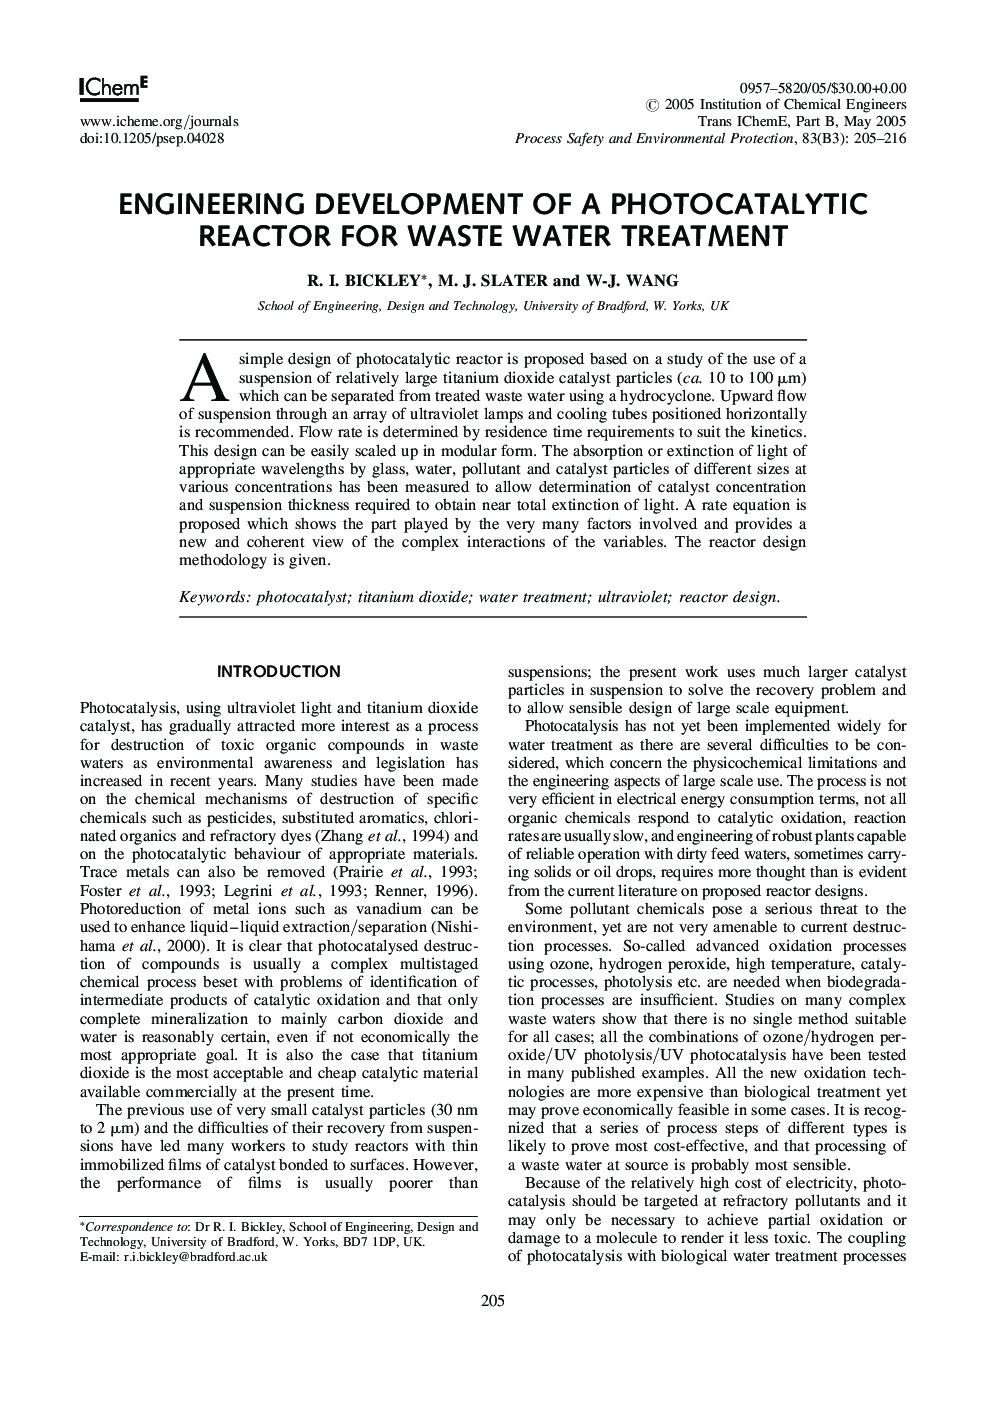 Engineering Development of a Photocatalytic Reactor for Waste Water Treatment